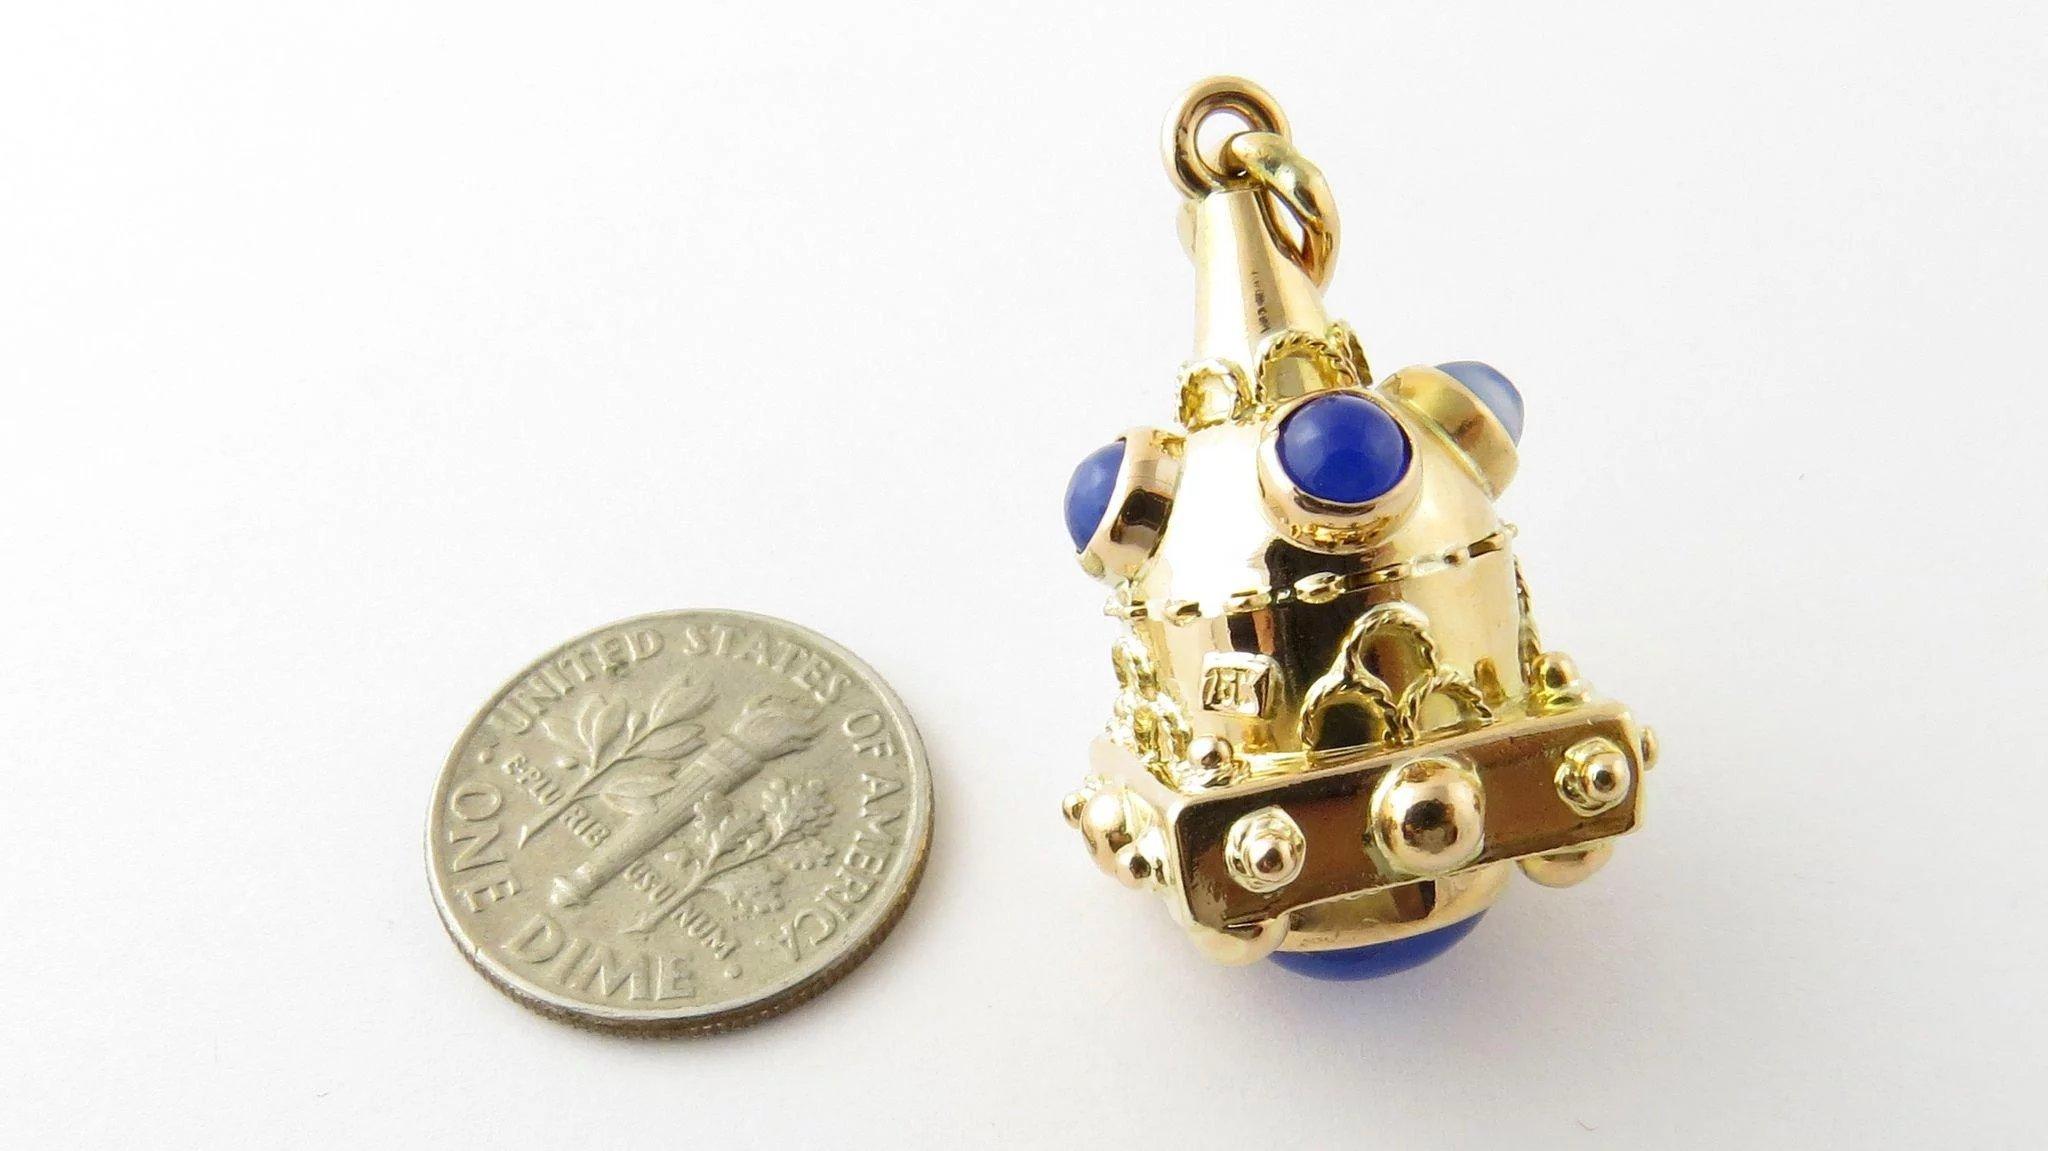 18 Karat Yellow Gold and Genuine Lapis Pendant or Watch Fob 3